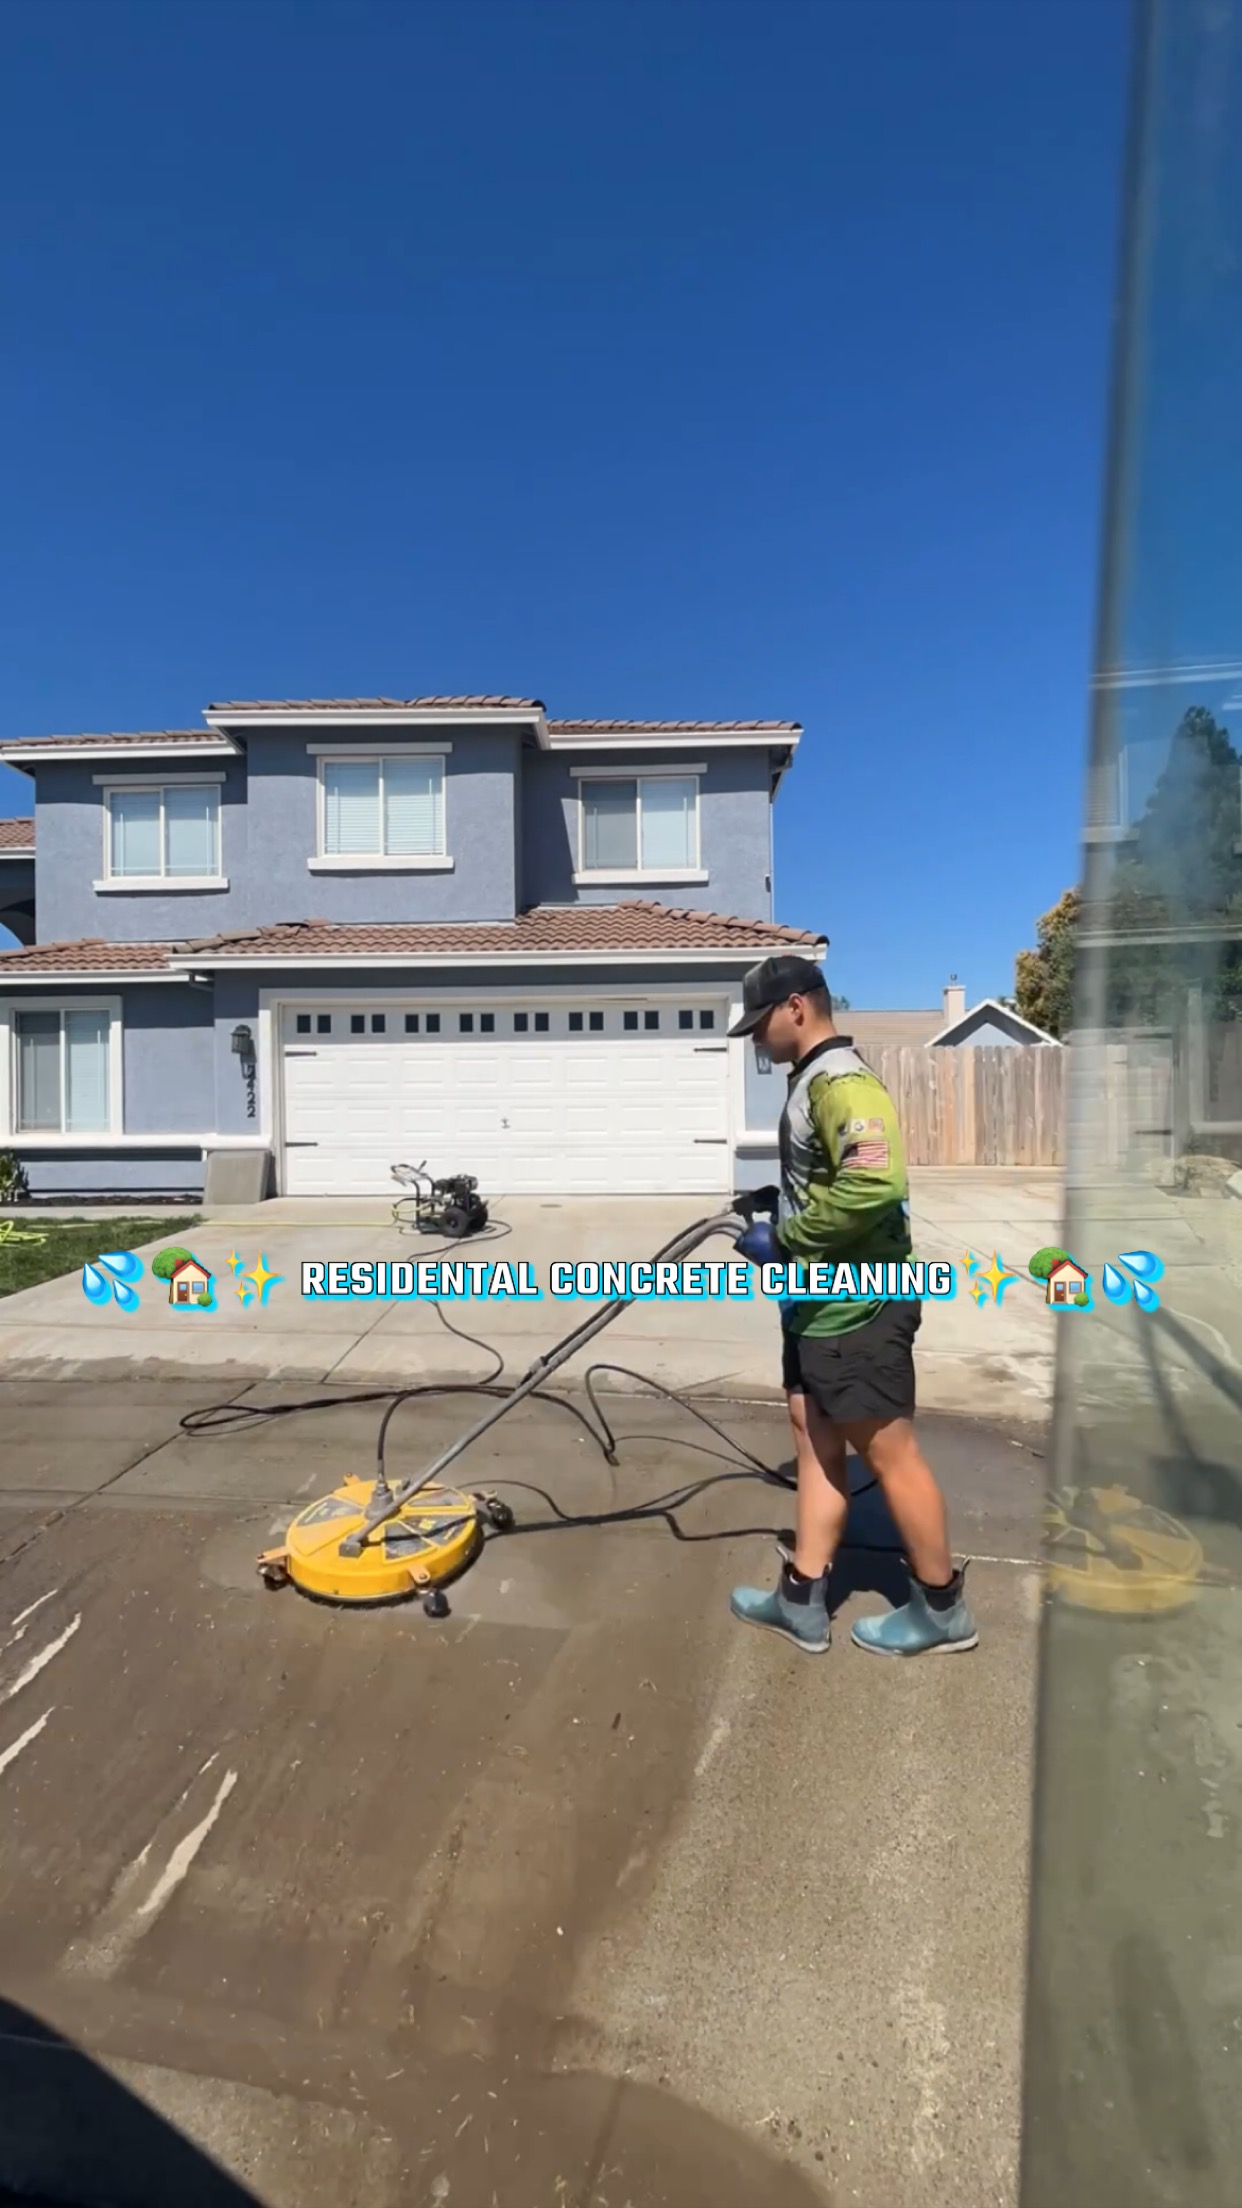 Residential Concrete Cleaning in Riverbank, CA